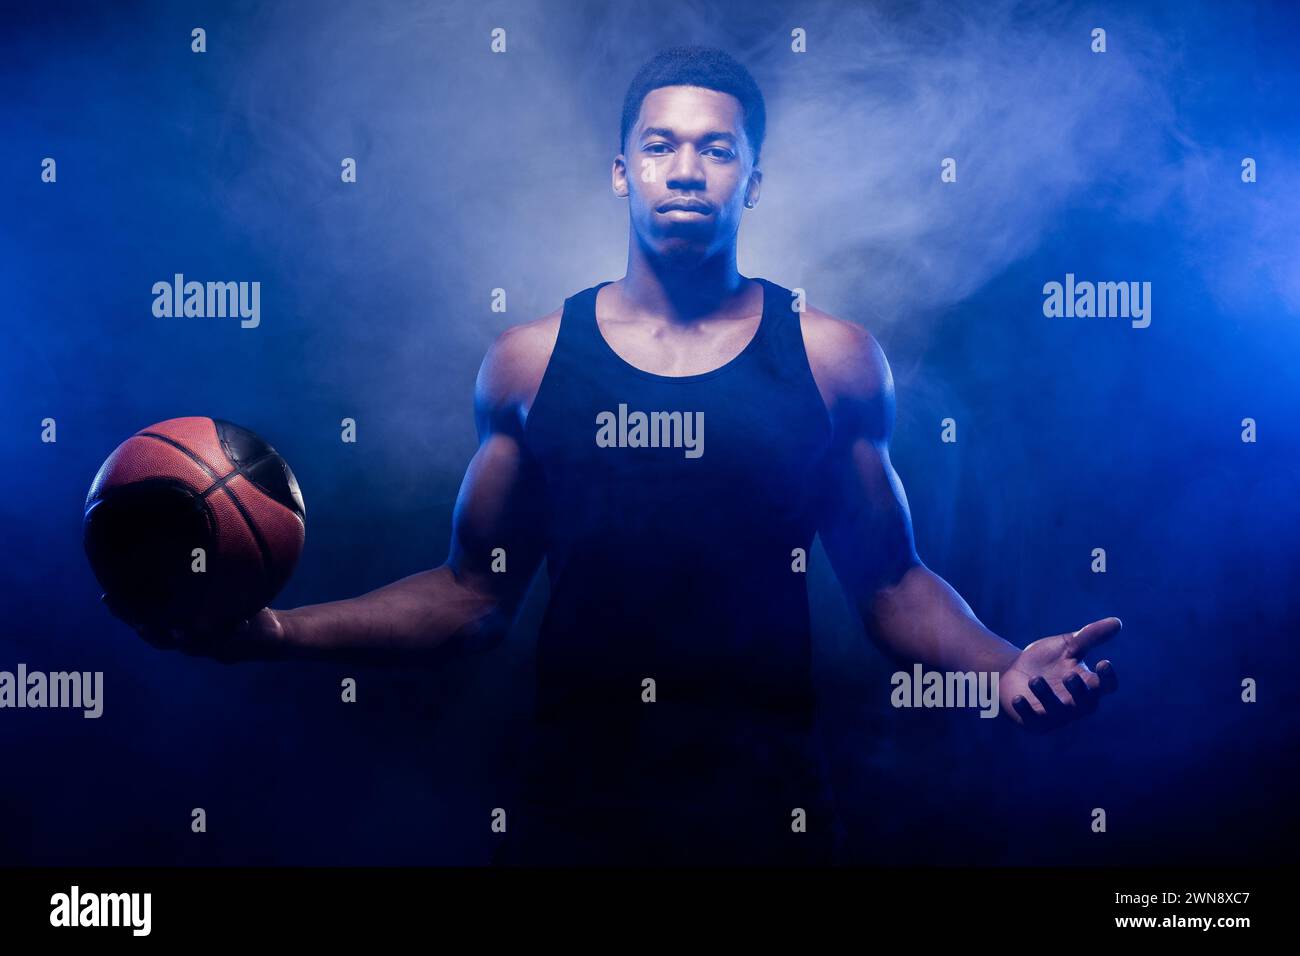 Basketball player lit with blue color posing with a ball against smoke background. Serious concentrated african american man. Stock Photo